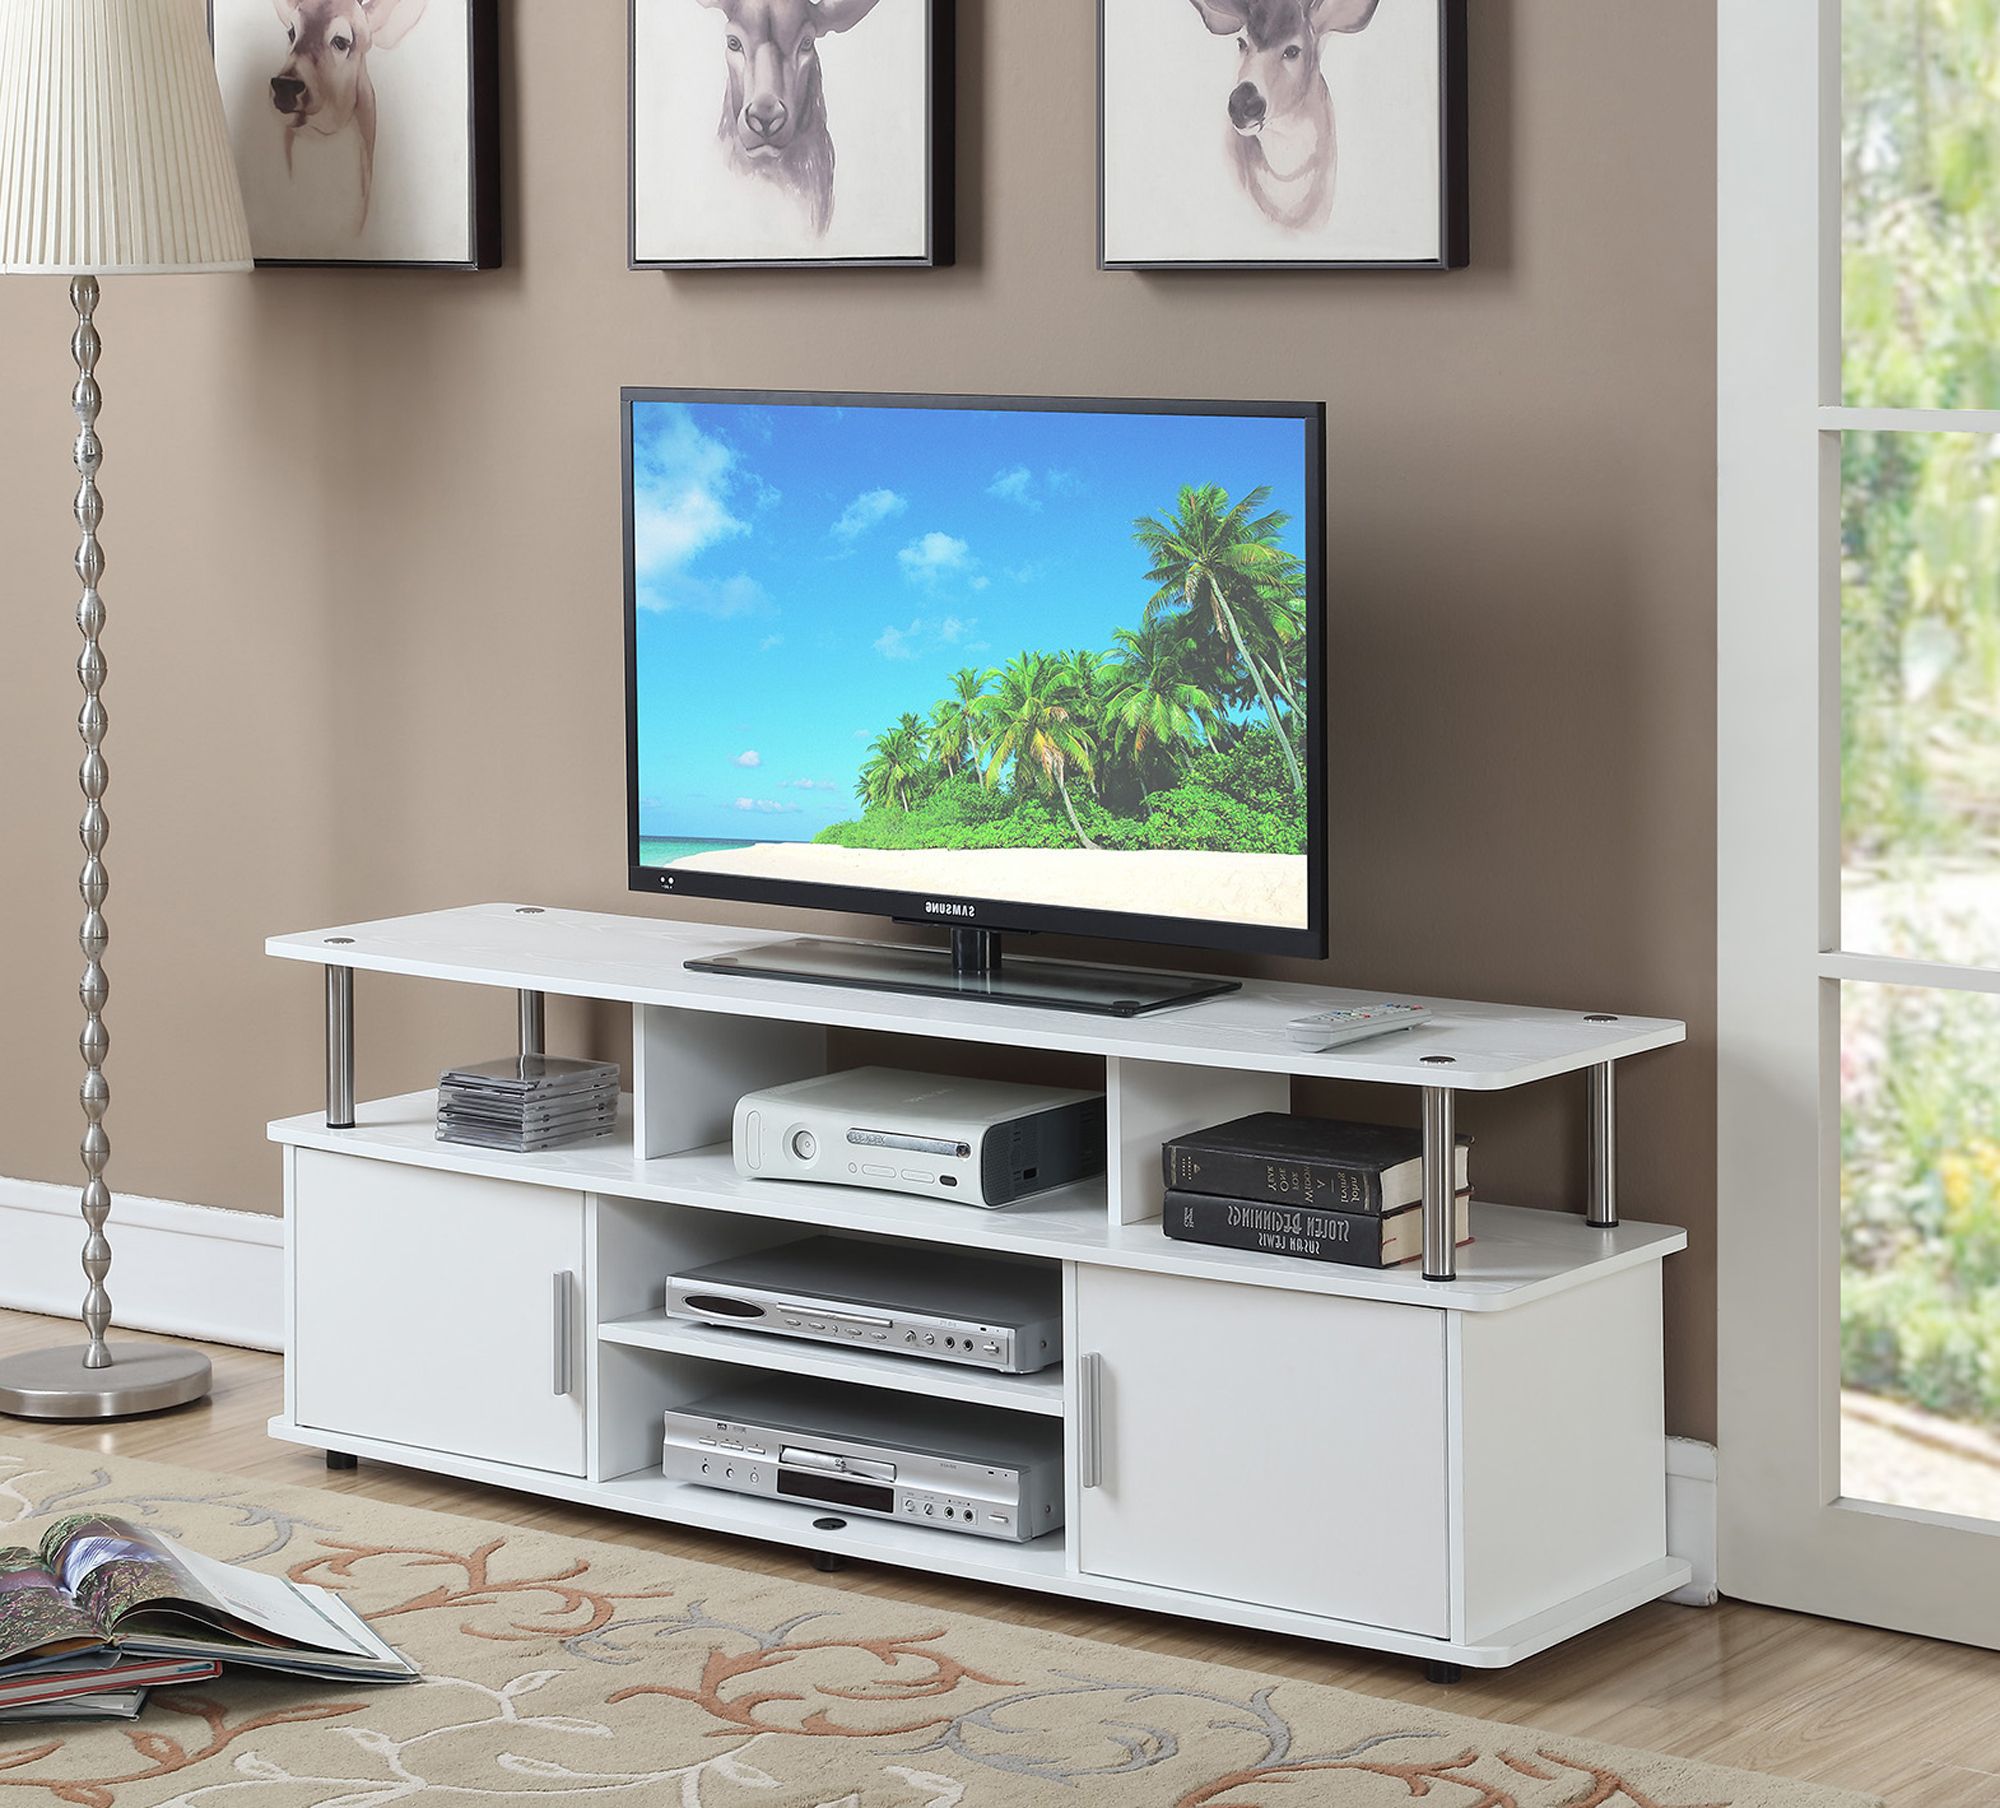 Convenience Concepts Designs2go 60" Monterey Tv Stand Intended For Well Known Skofte Tv Stands For Tvs Up To 60" (View 6 of 20)